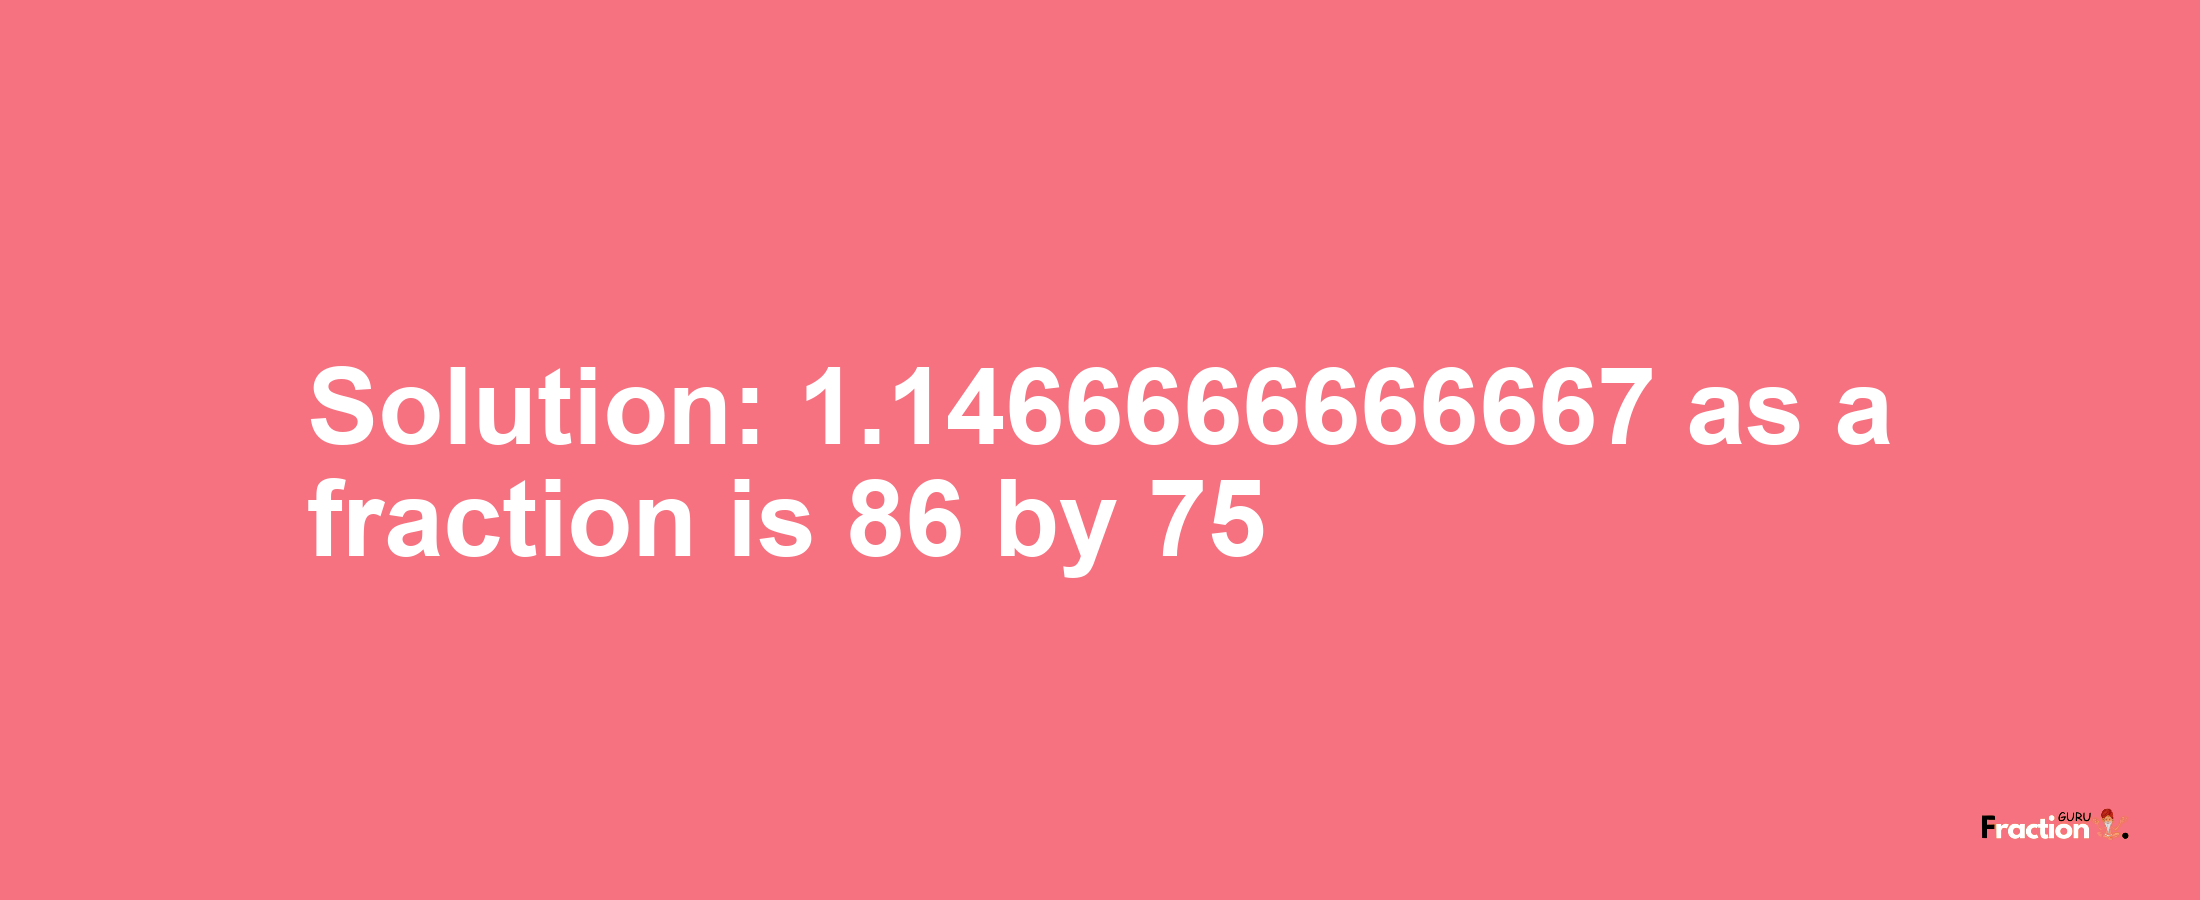 Solution:1.1466666666667 as a fraction is 86/75